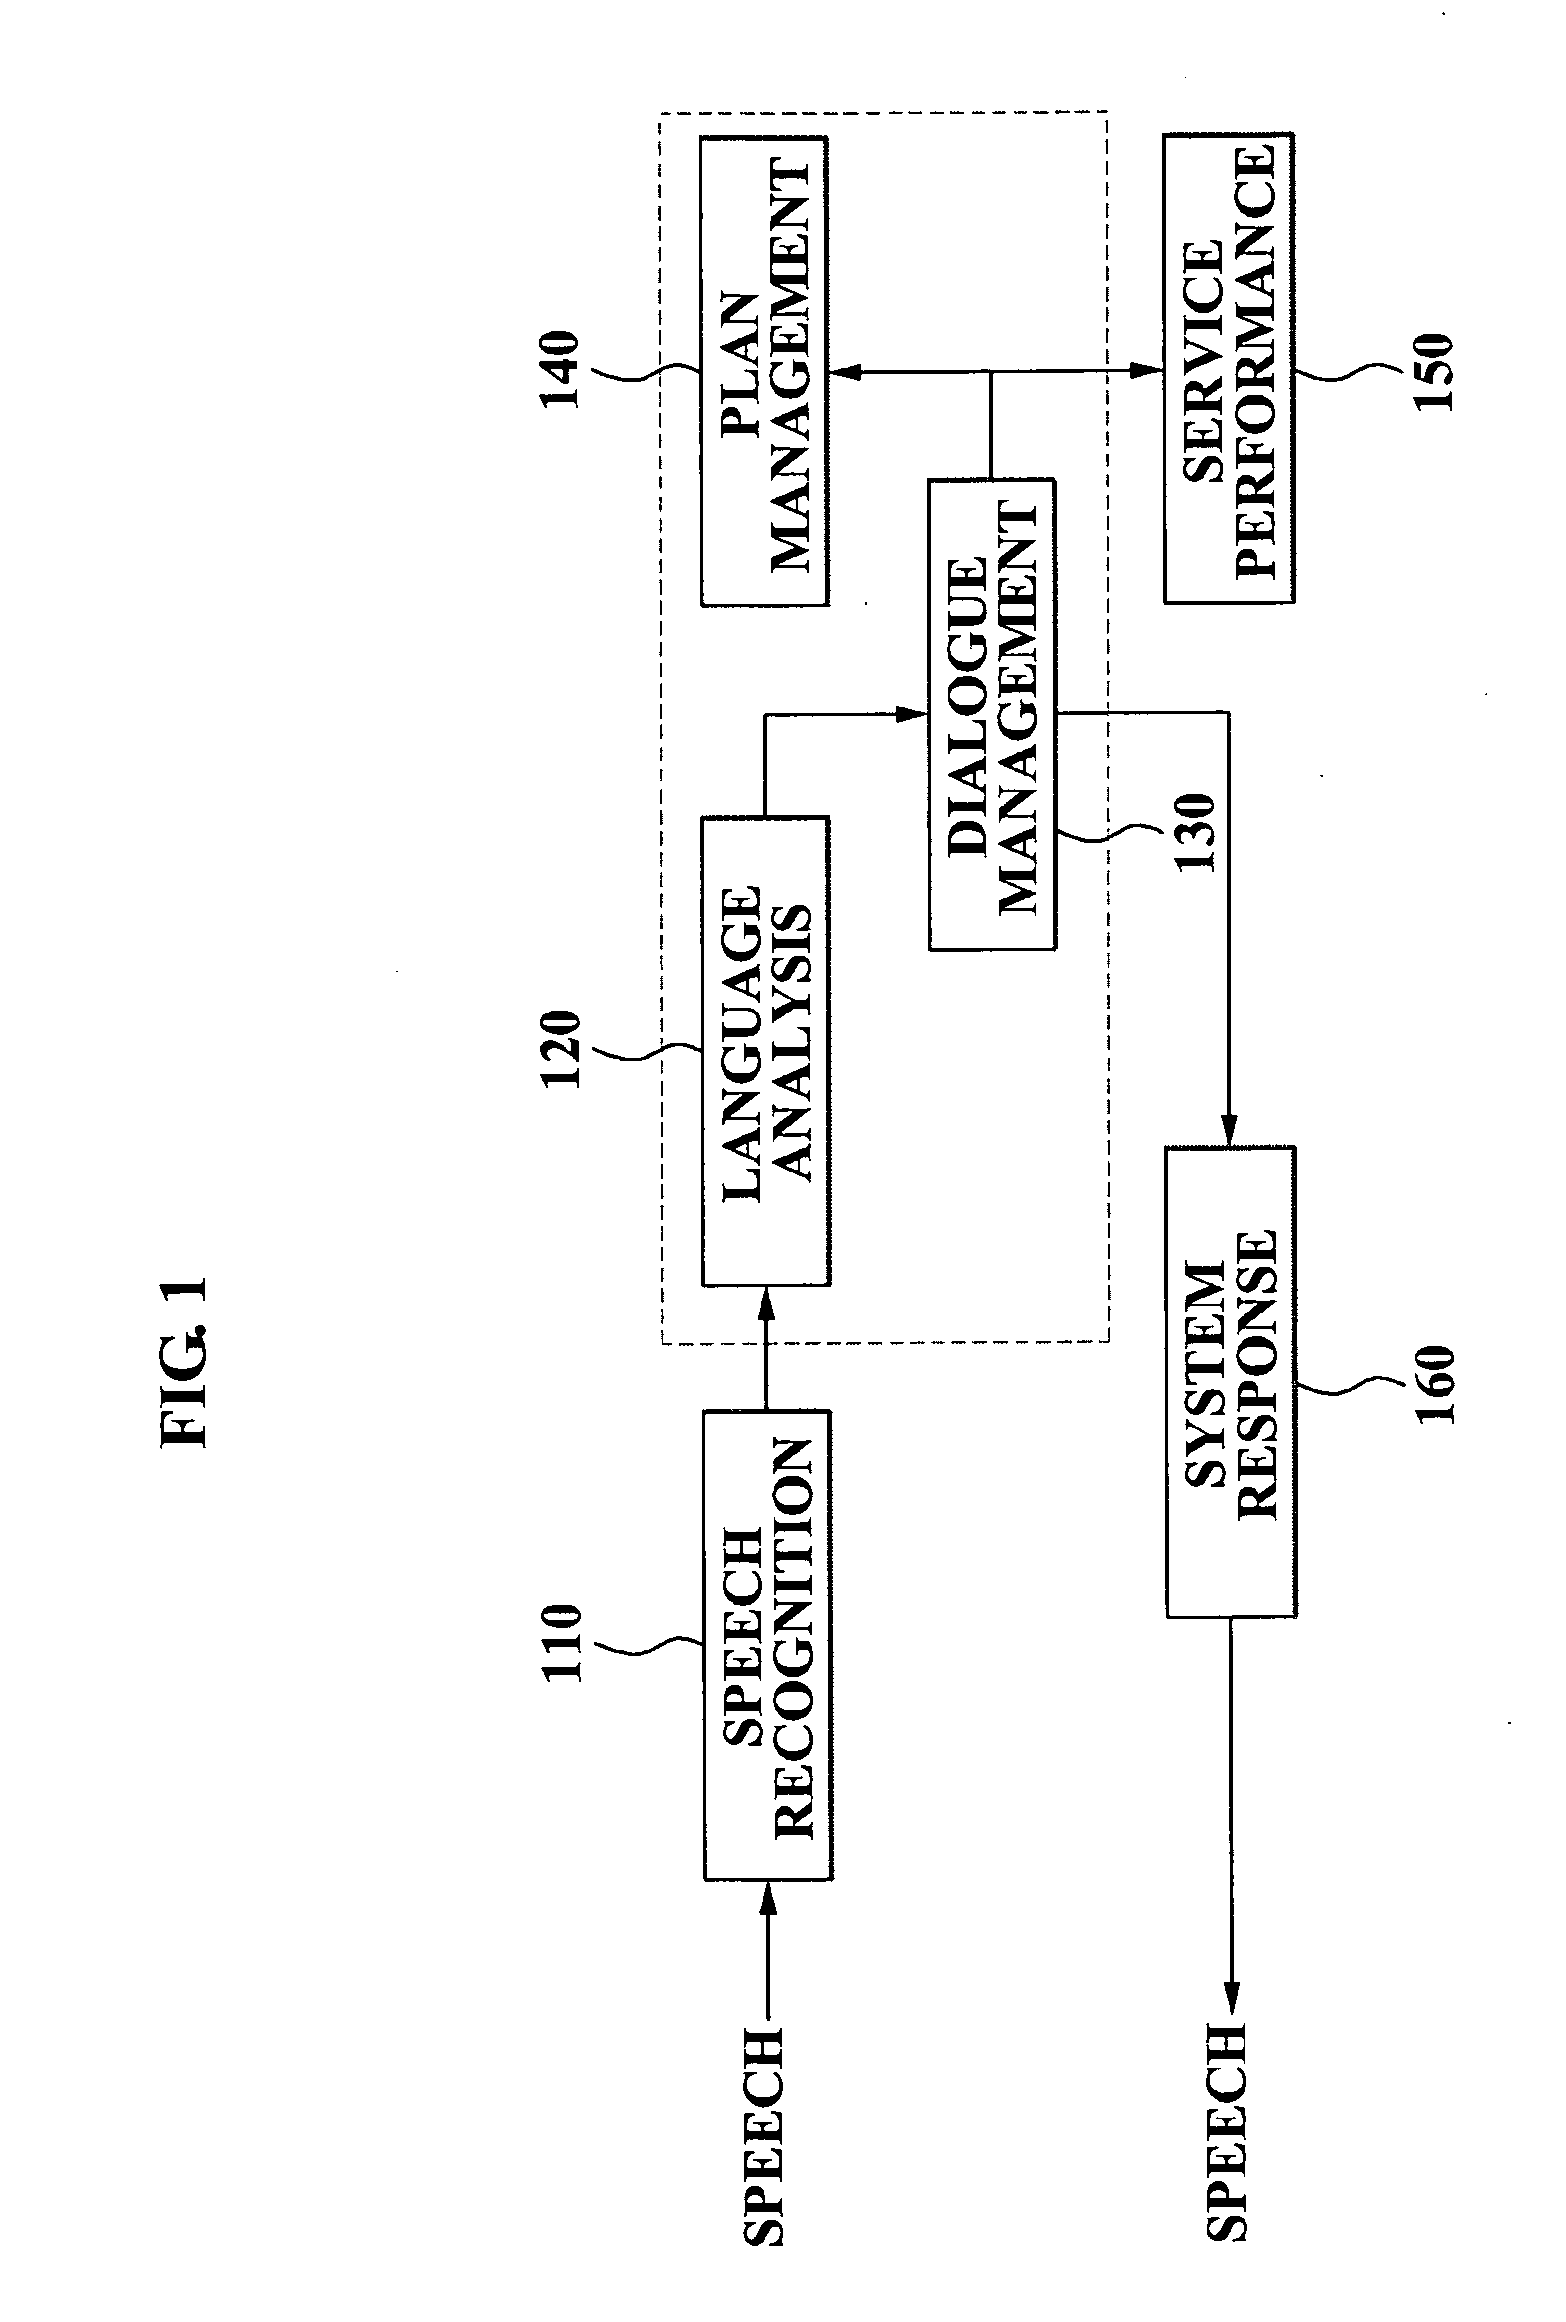 Apparatus for providing voice dialogue service and method of operating the same